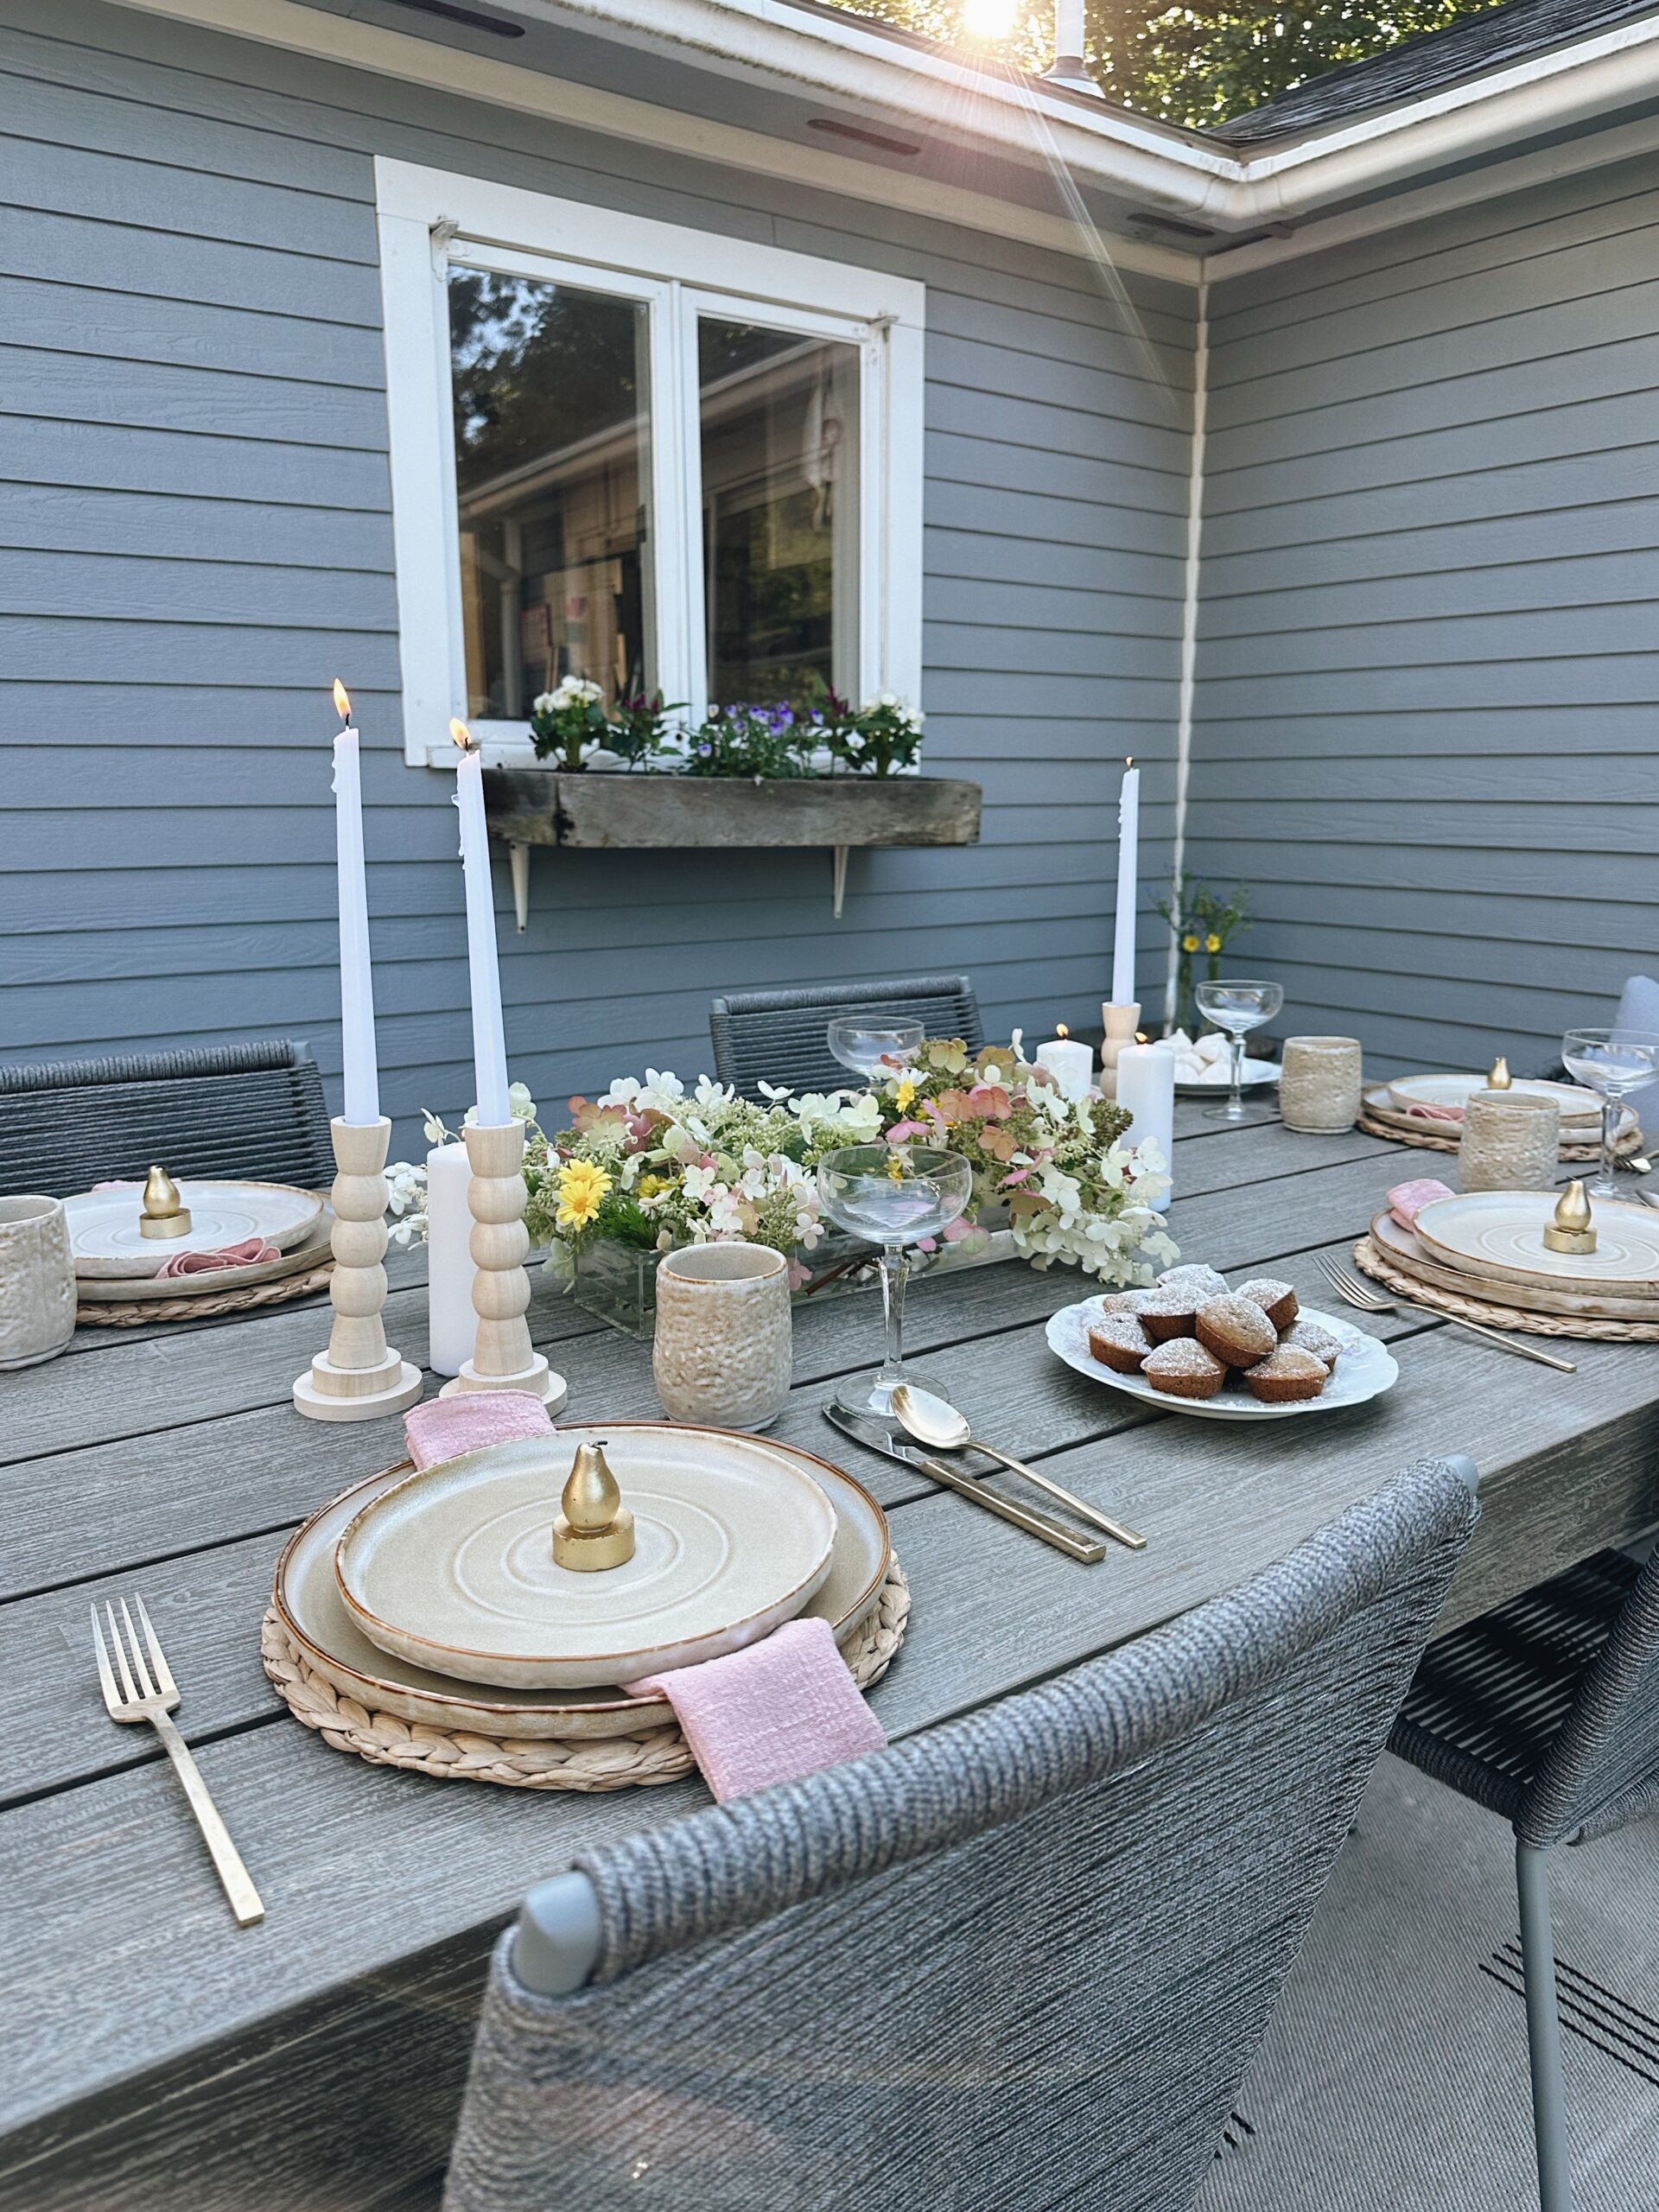 early autumn brunch decor inspiration with Article outdoor furniture